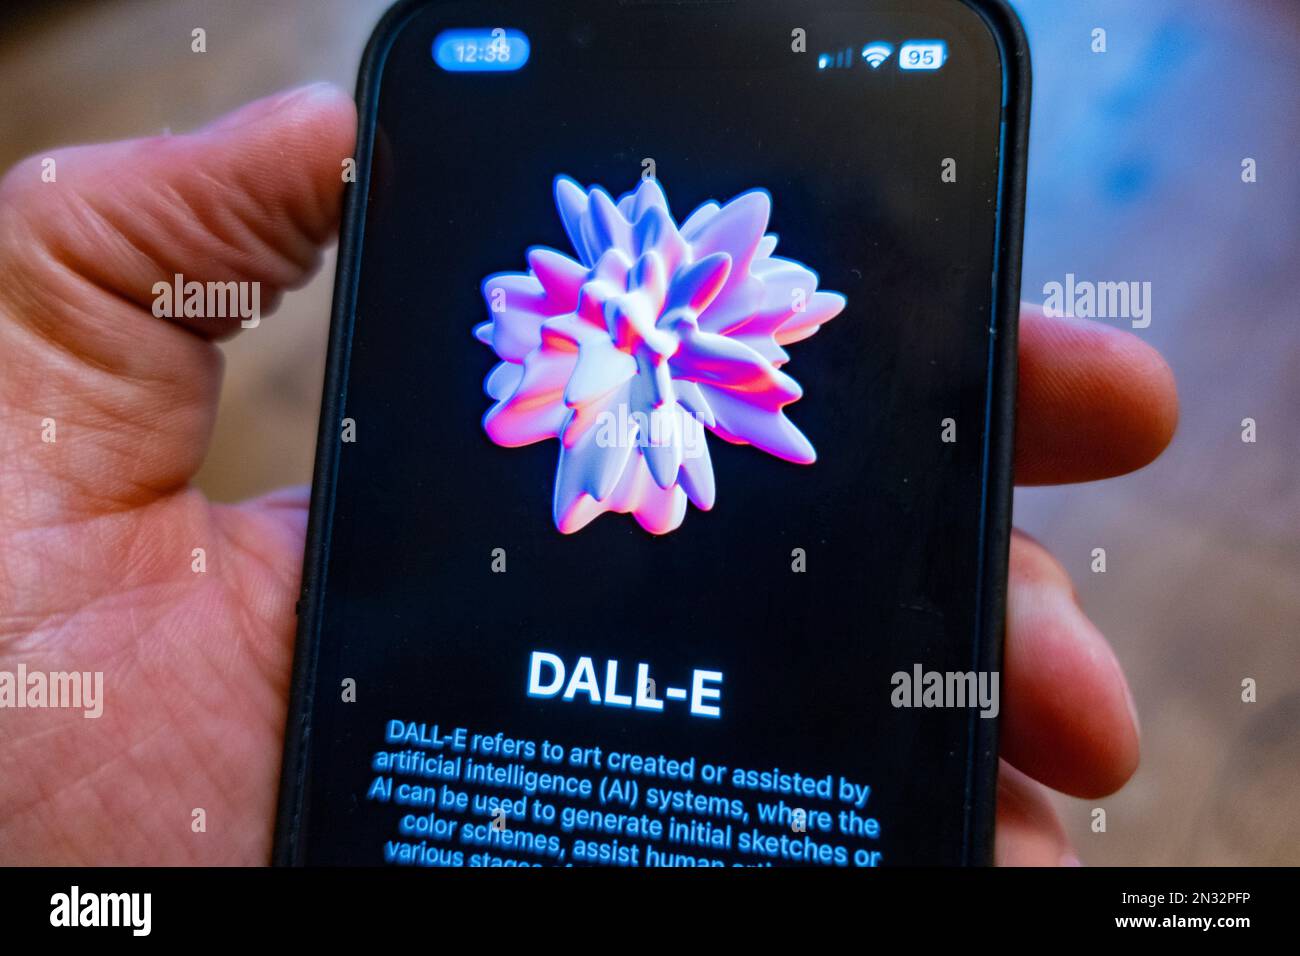 Artificial Intelligence system Dall-E logo shown on screen of mobile phone Stock Photo